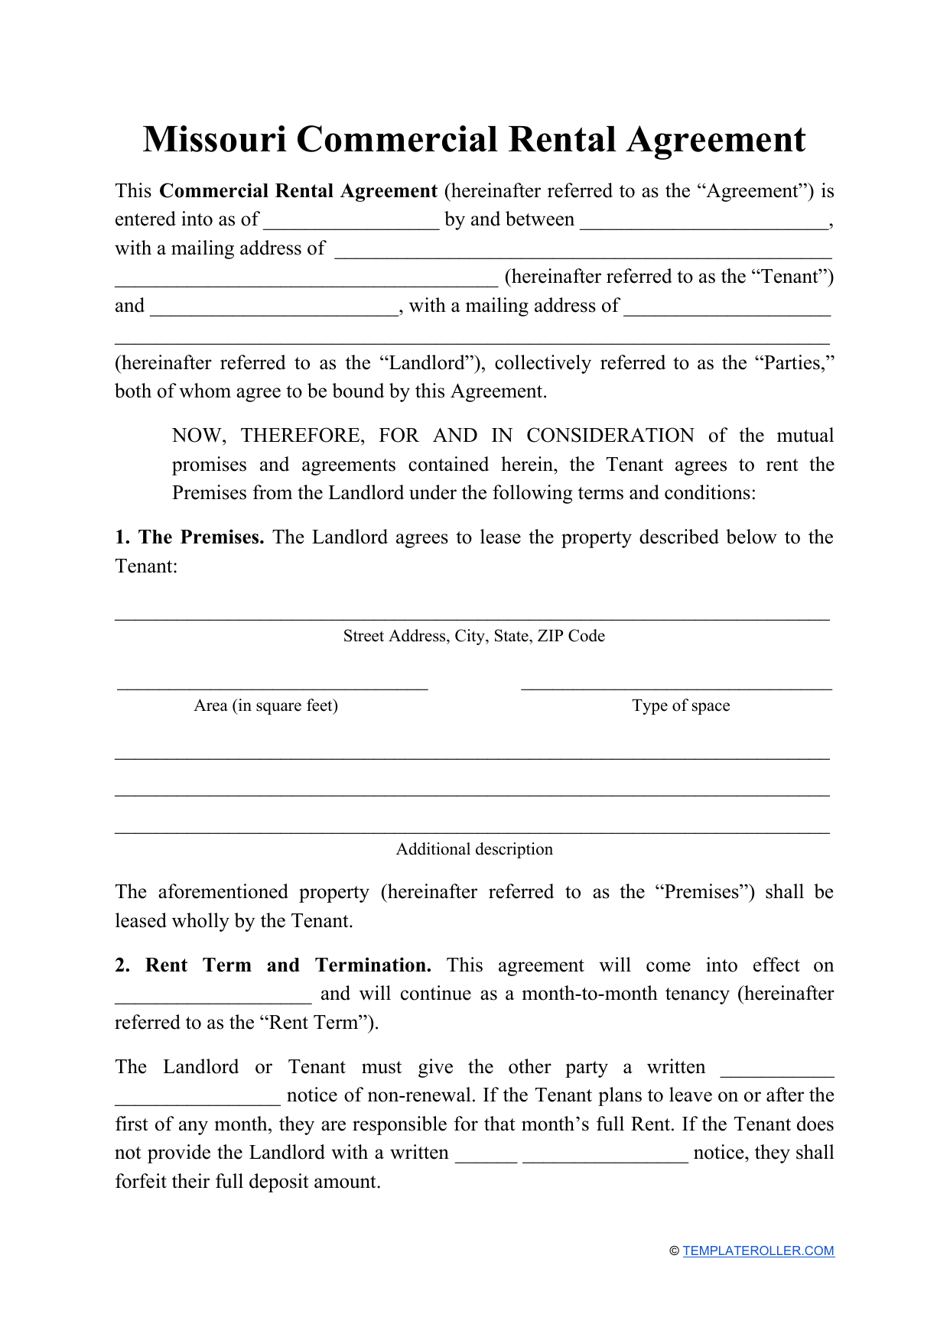 Commercial Rental Agreement Template - Missouri, Page 1